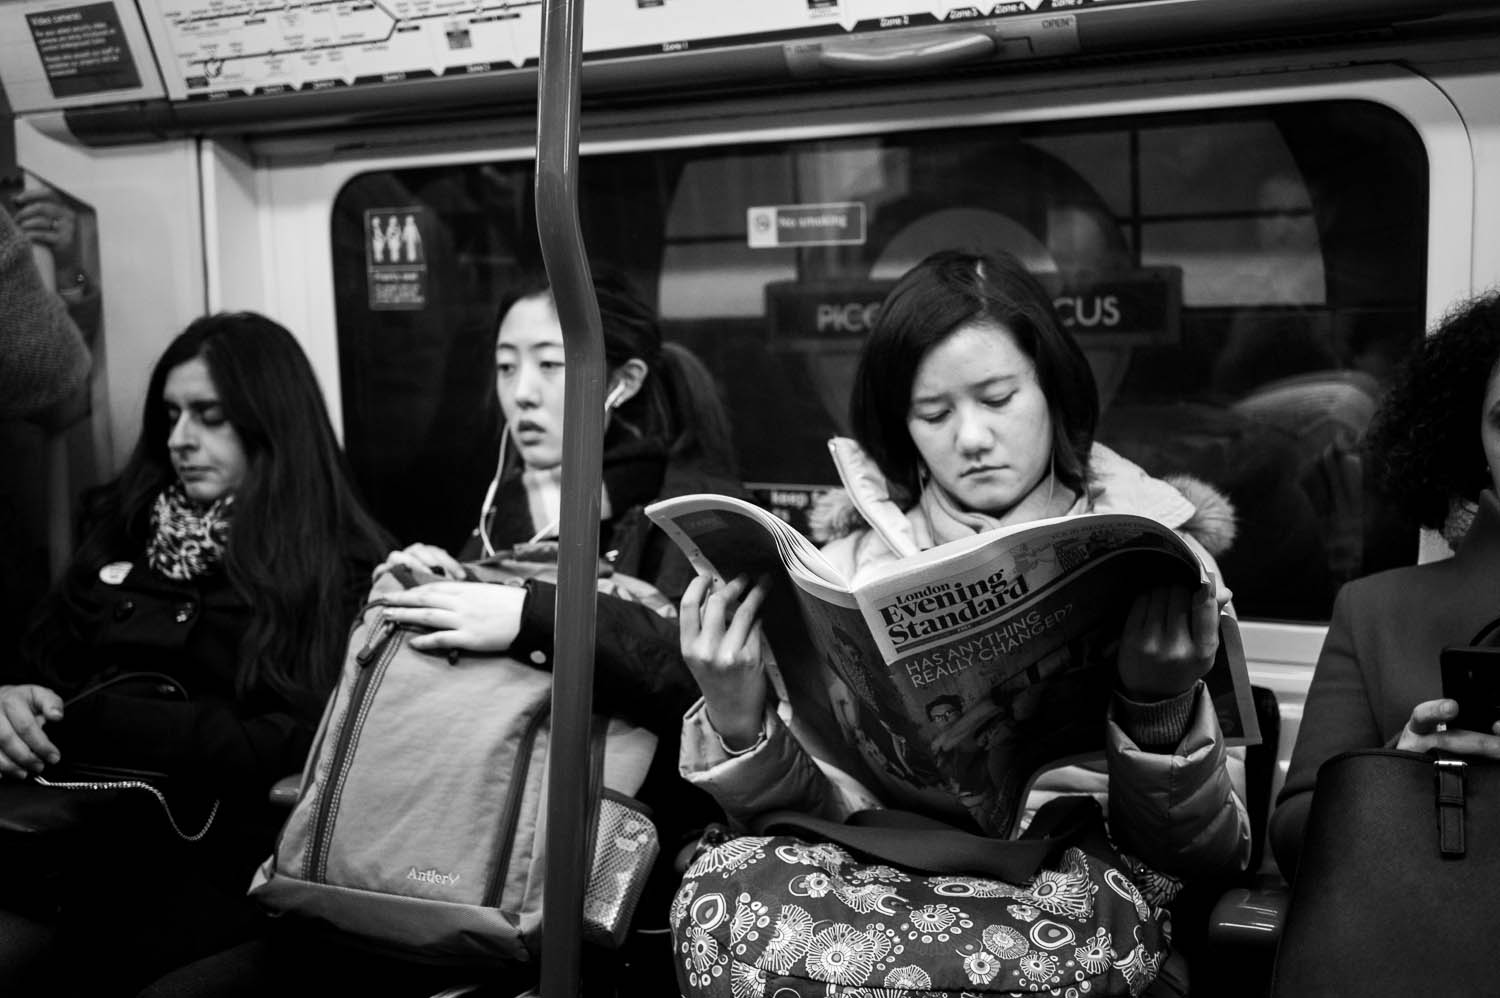 A woman reads the London Evening Standard on the London tube.